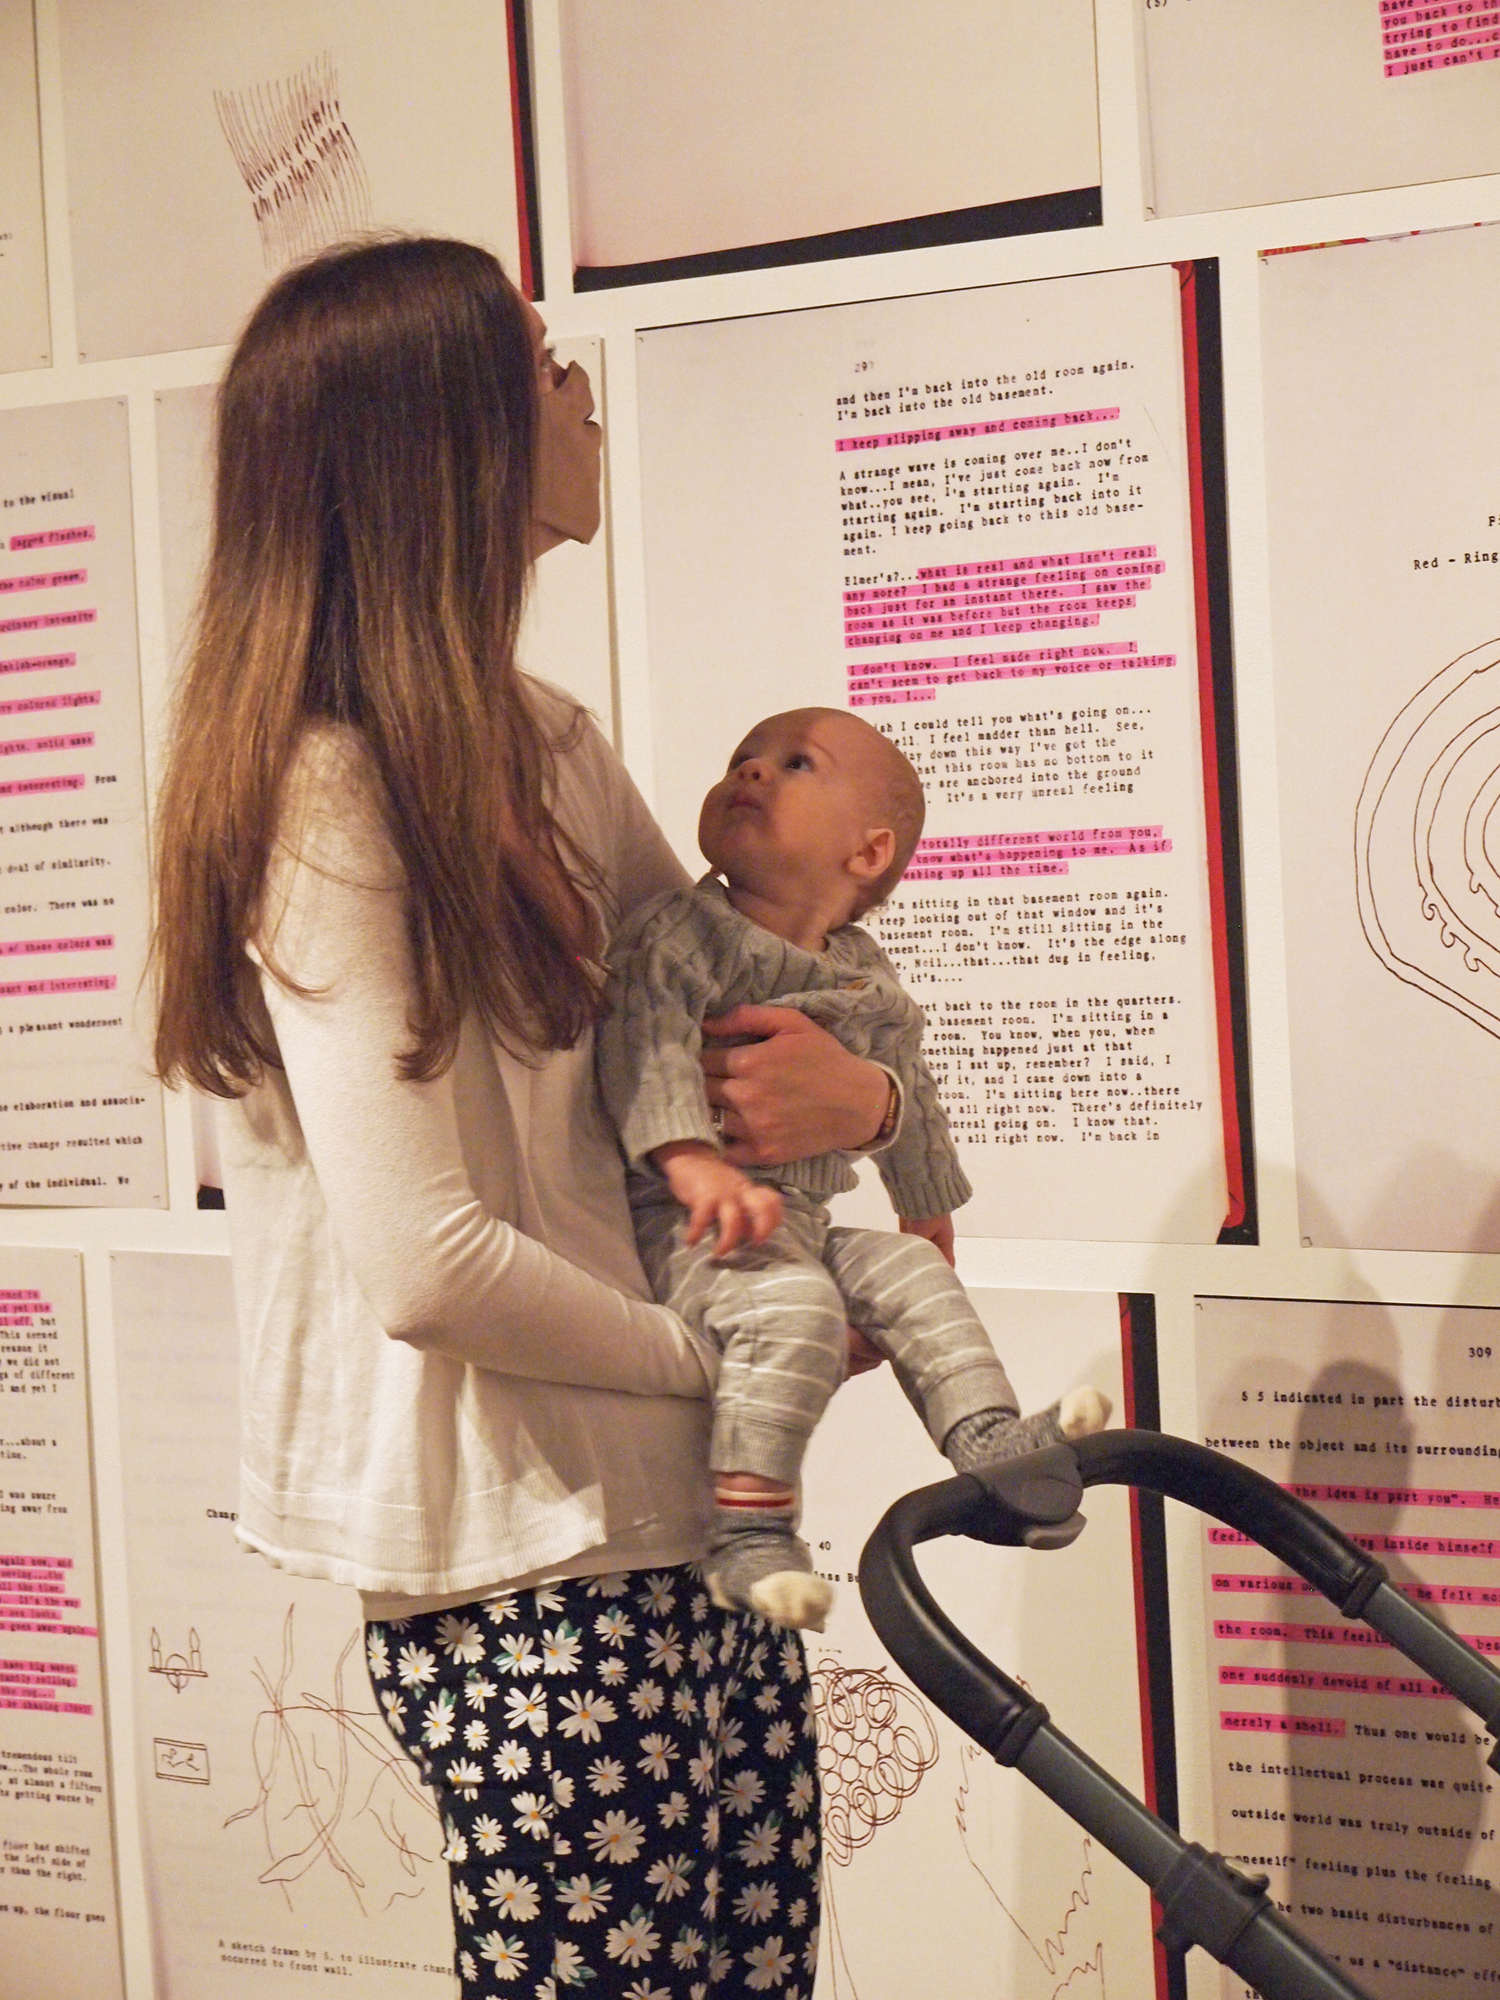 A mother looks at a wall filled with enlarged research documents marked with pink highlighter while holding a baby who gazes up at her